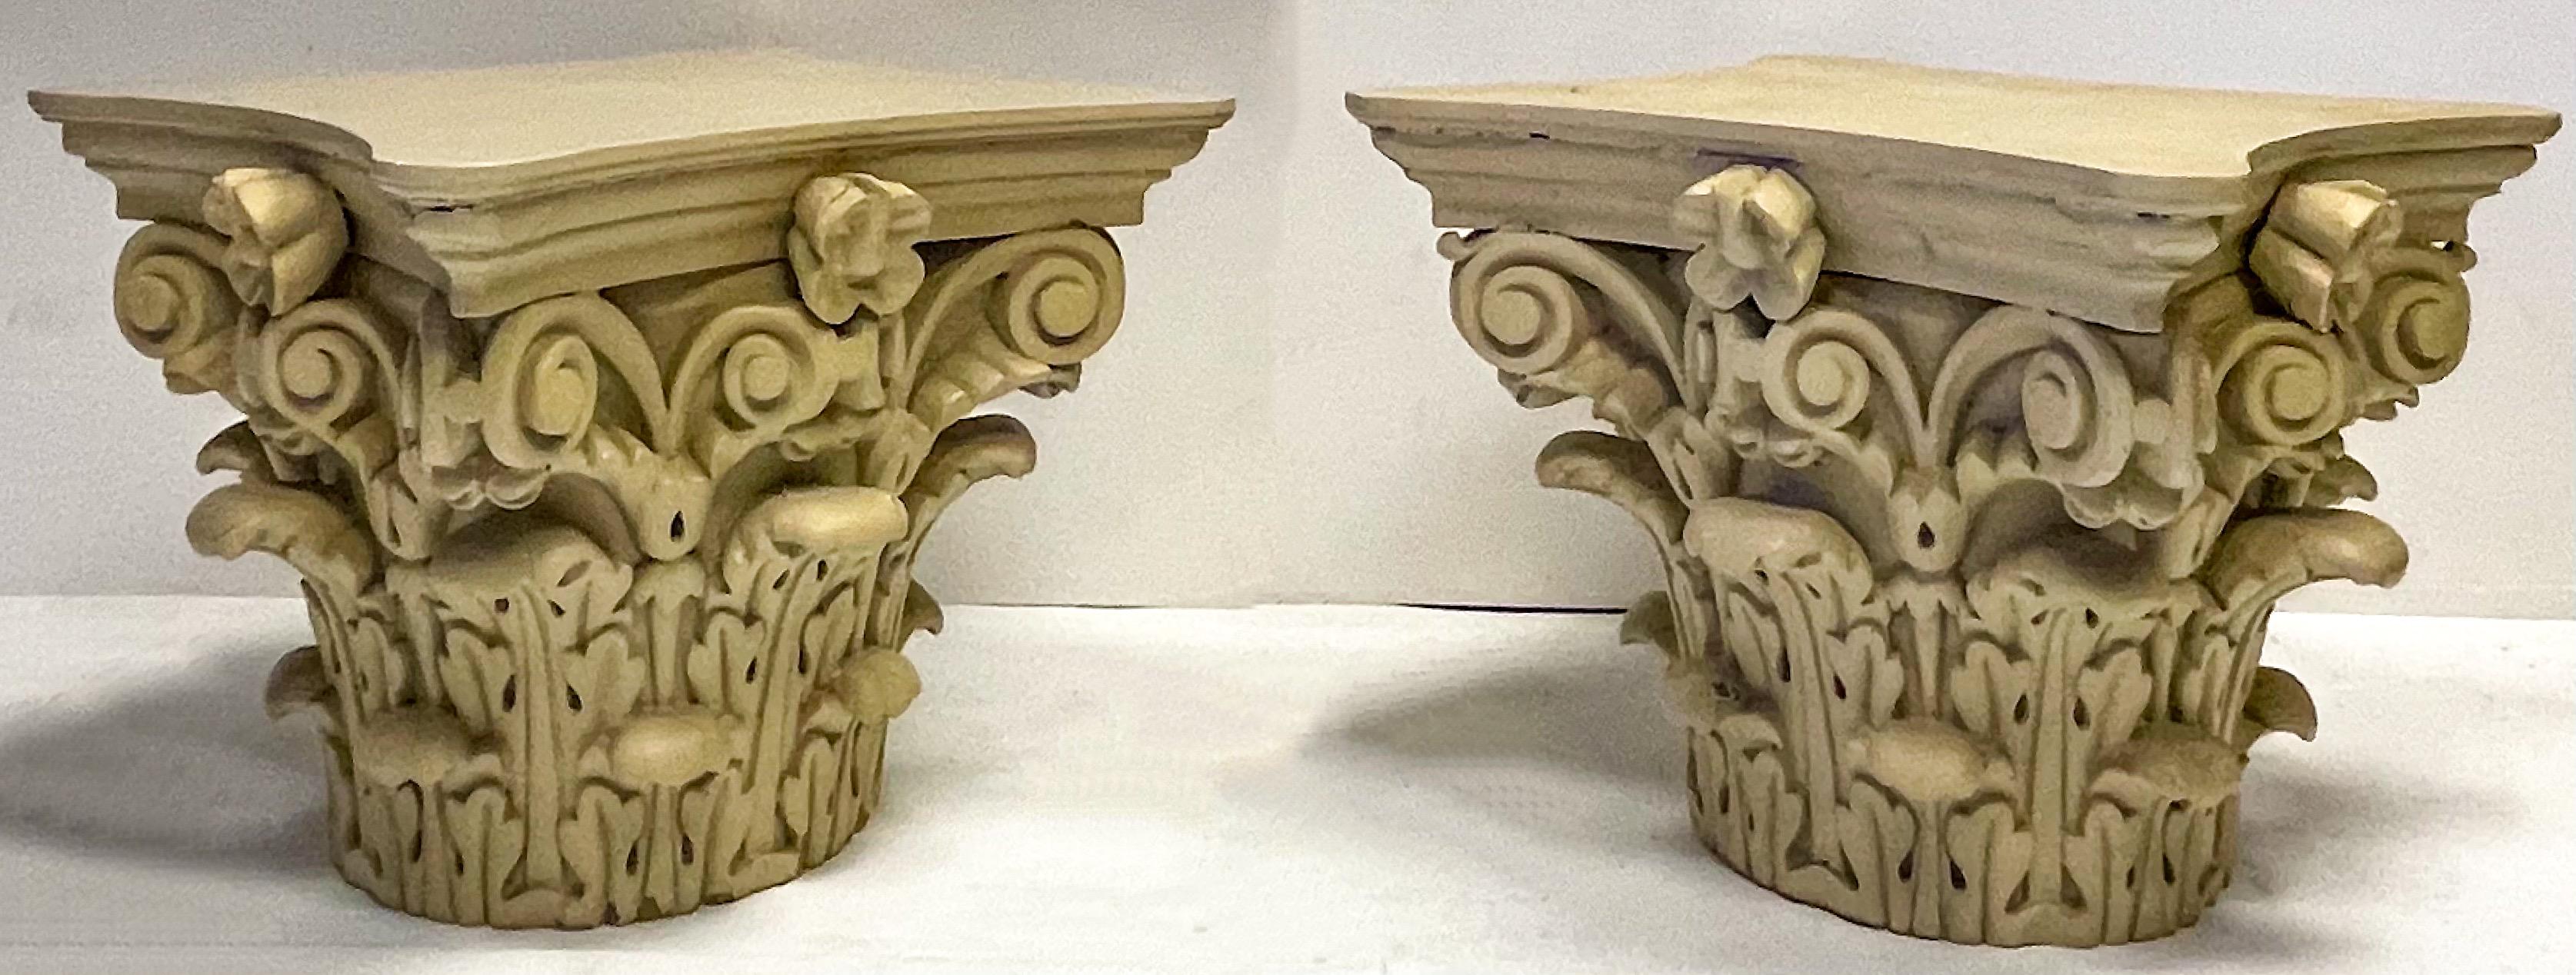 19th Century Carved Neo-Classical Style Capitals, Pair In Good Condition For Sale In Kennesaw, GA